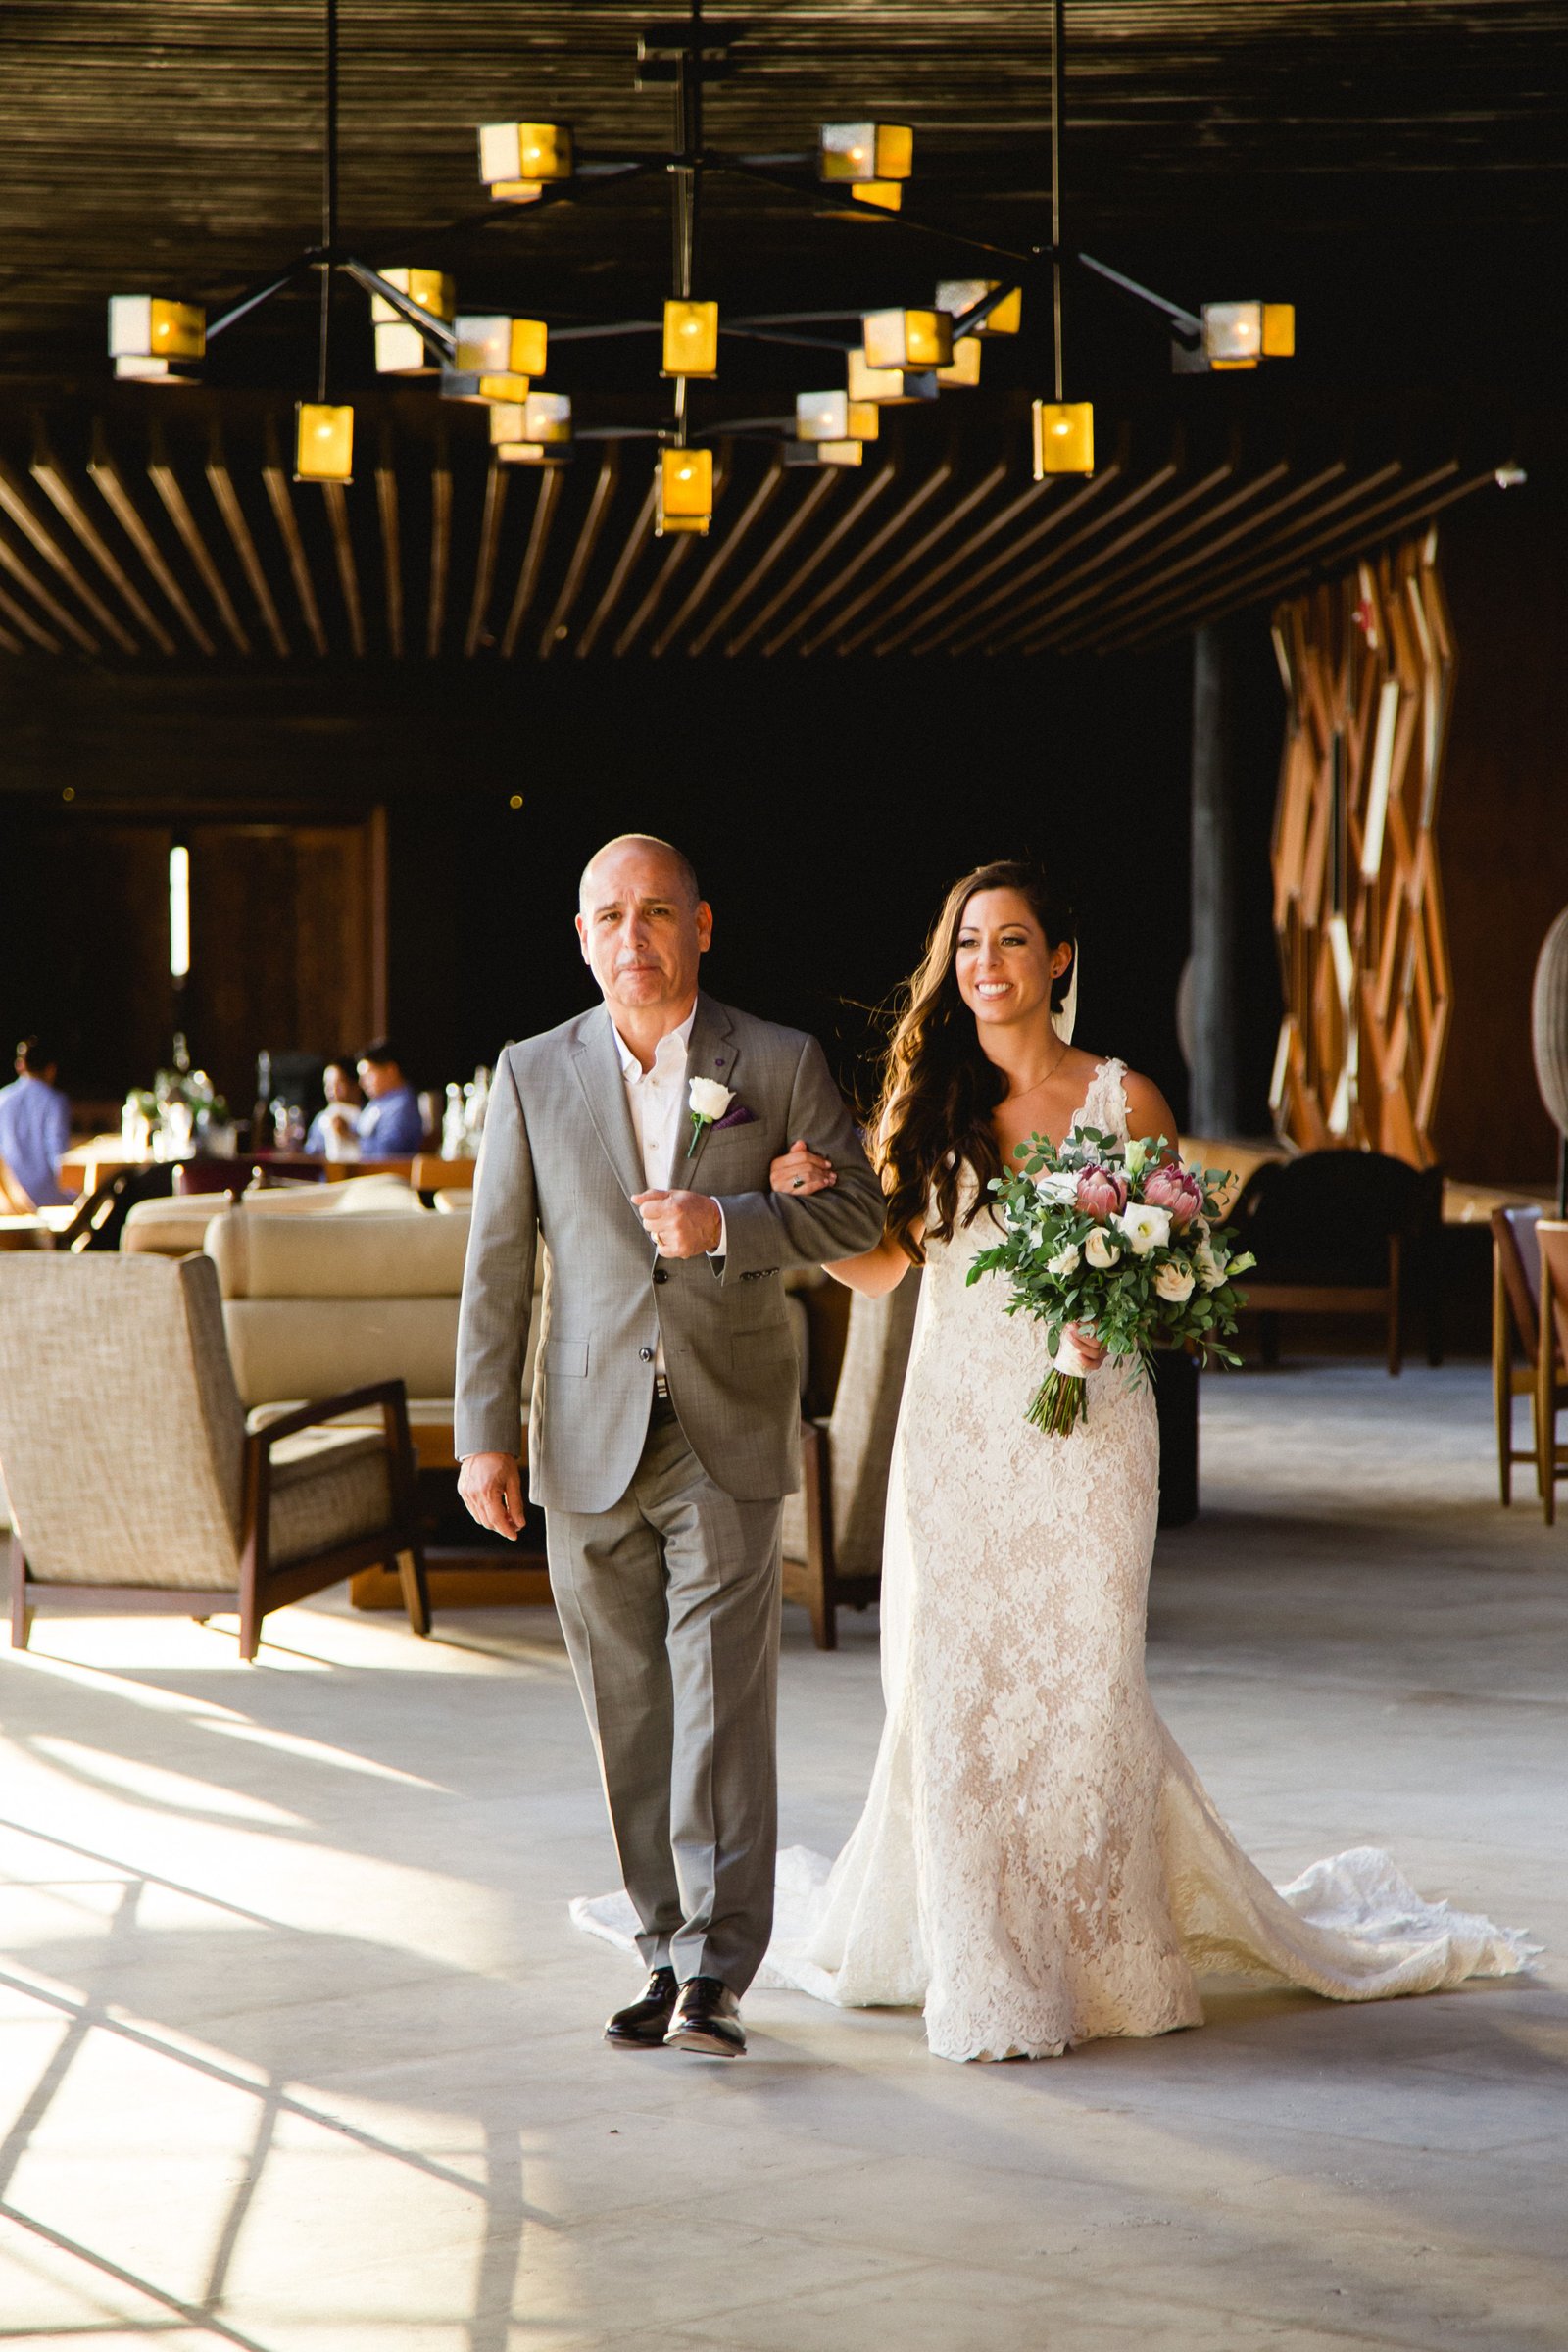 Bride walking down with her Father to the Ceremony at The Cape, in Los Cabos, Mexico. Wedding Planning was done by Jesse Wolff and Cabo Wedding Services